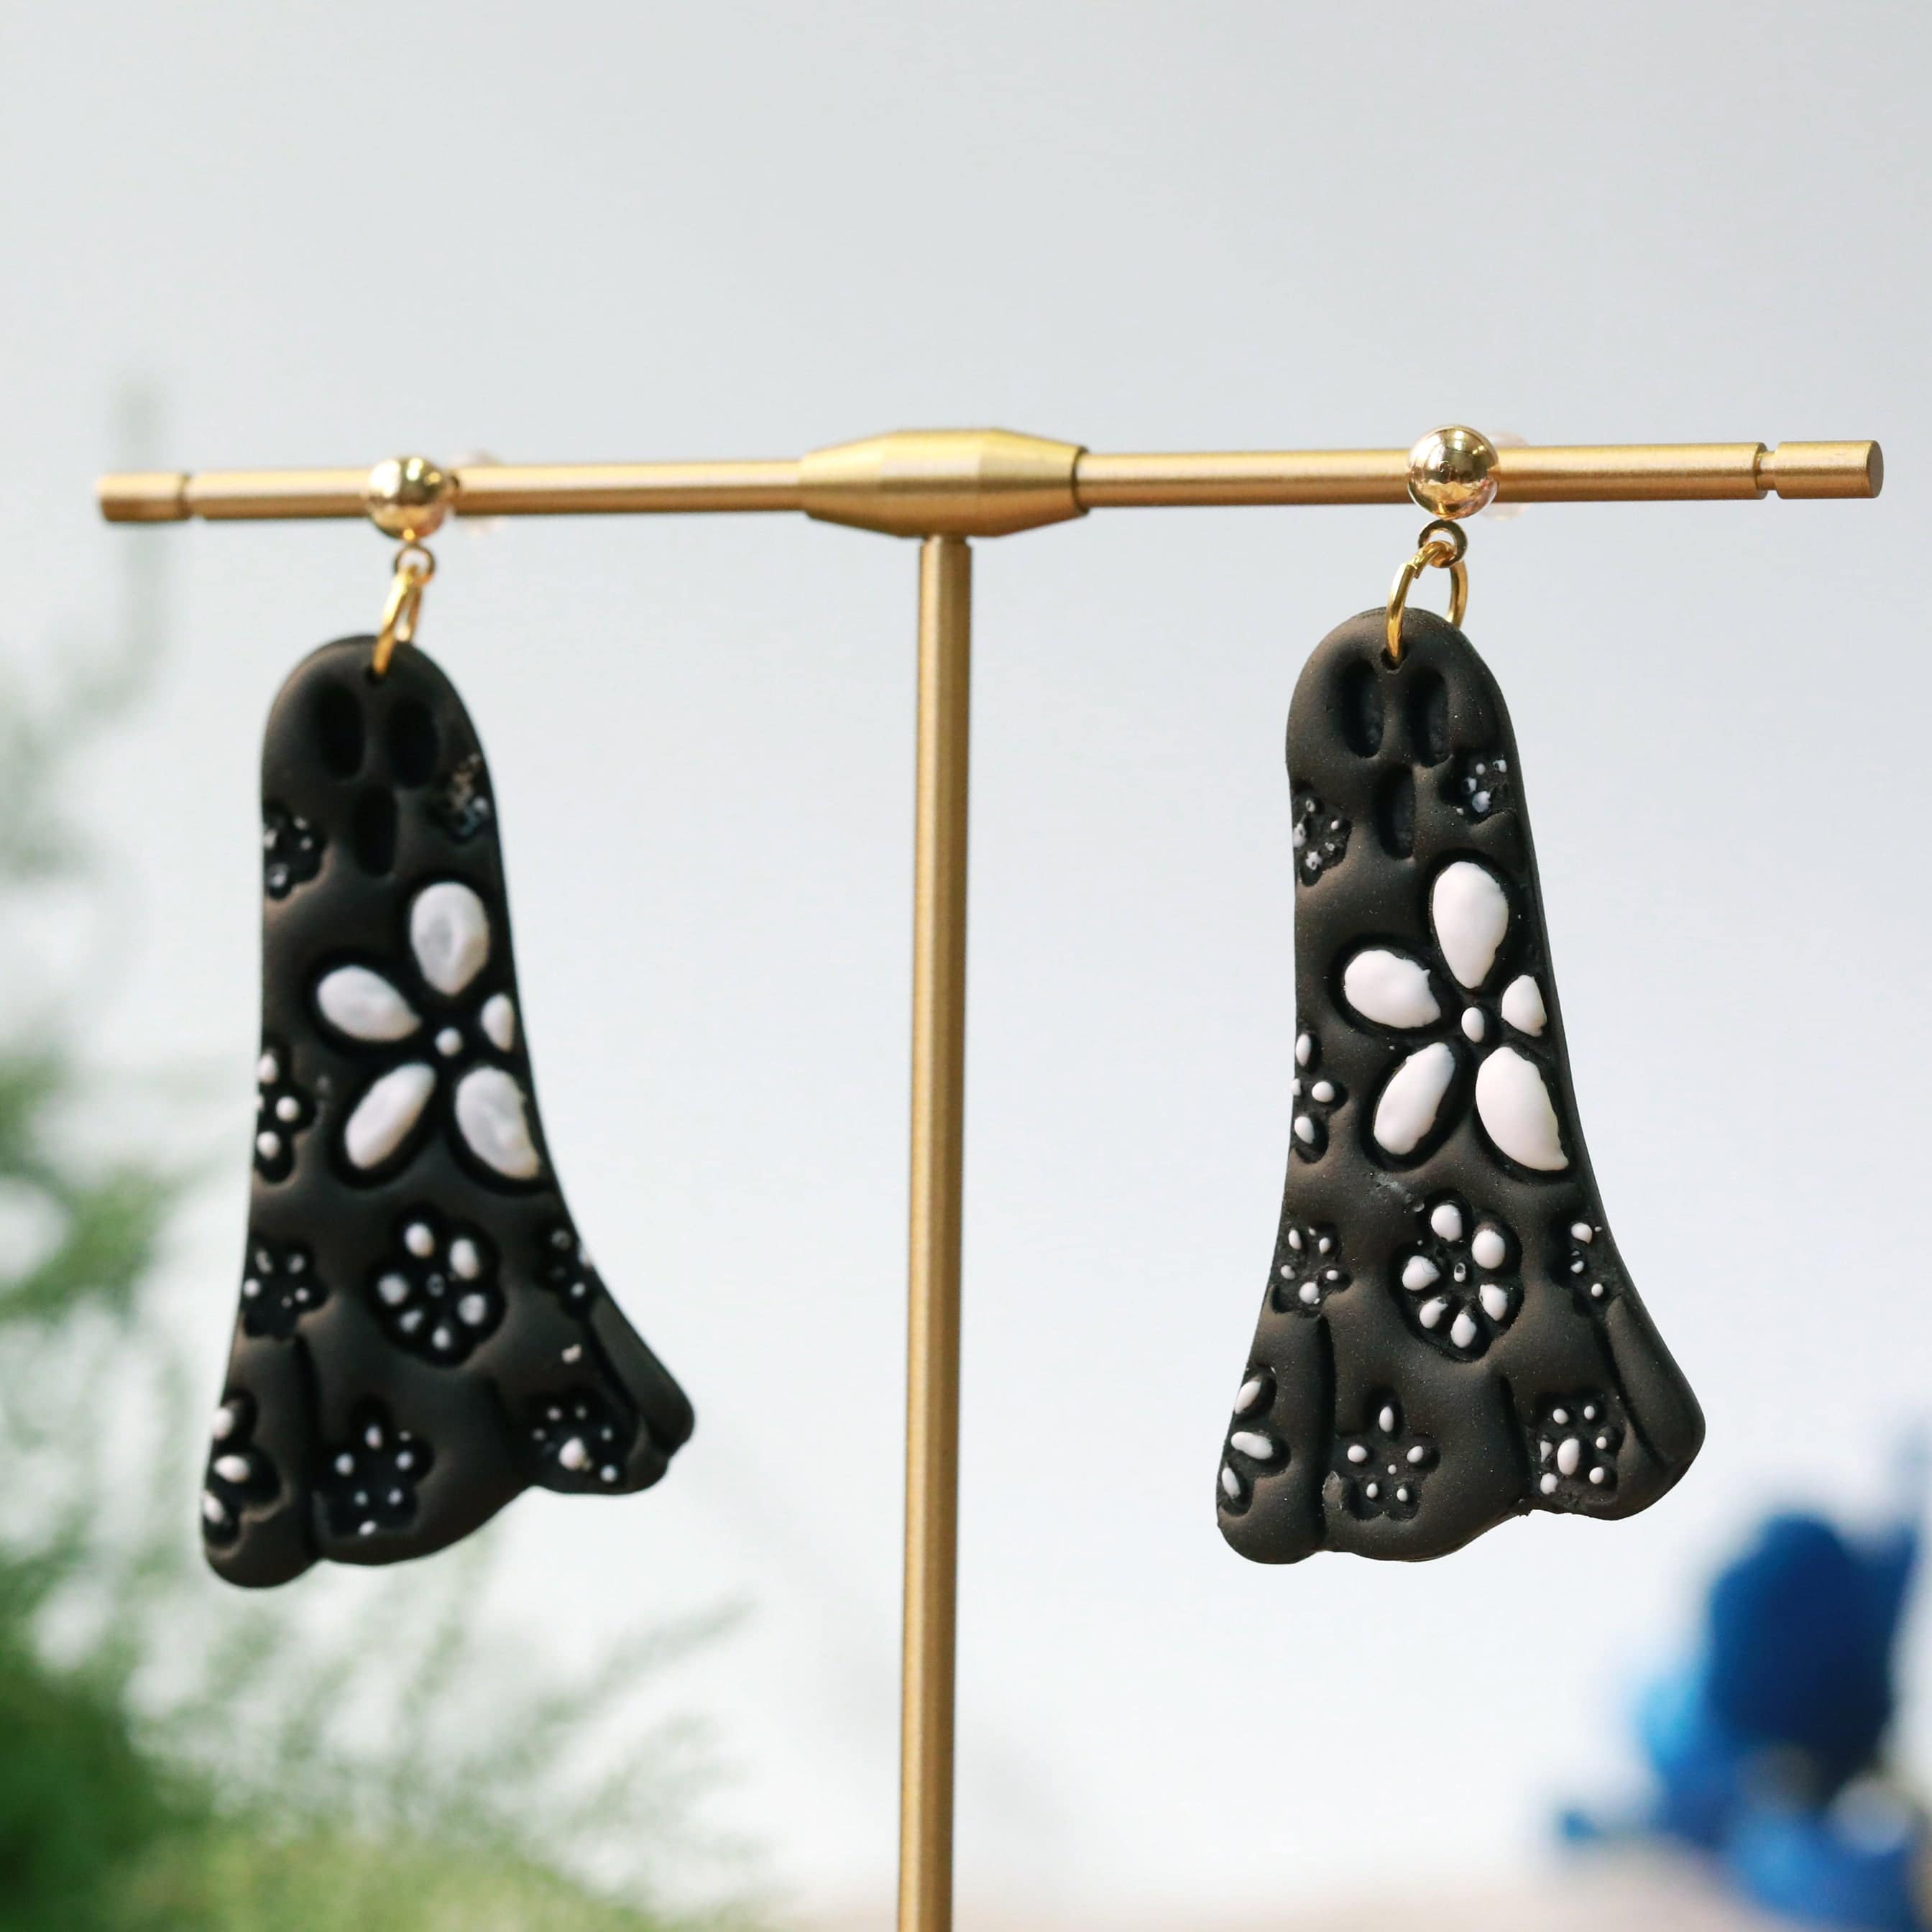 daisy ghost clay earrings in black and white by everything ky and i hanging image